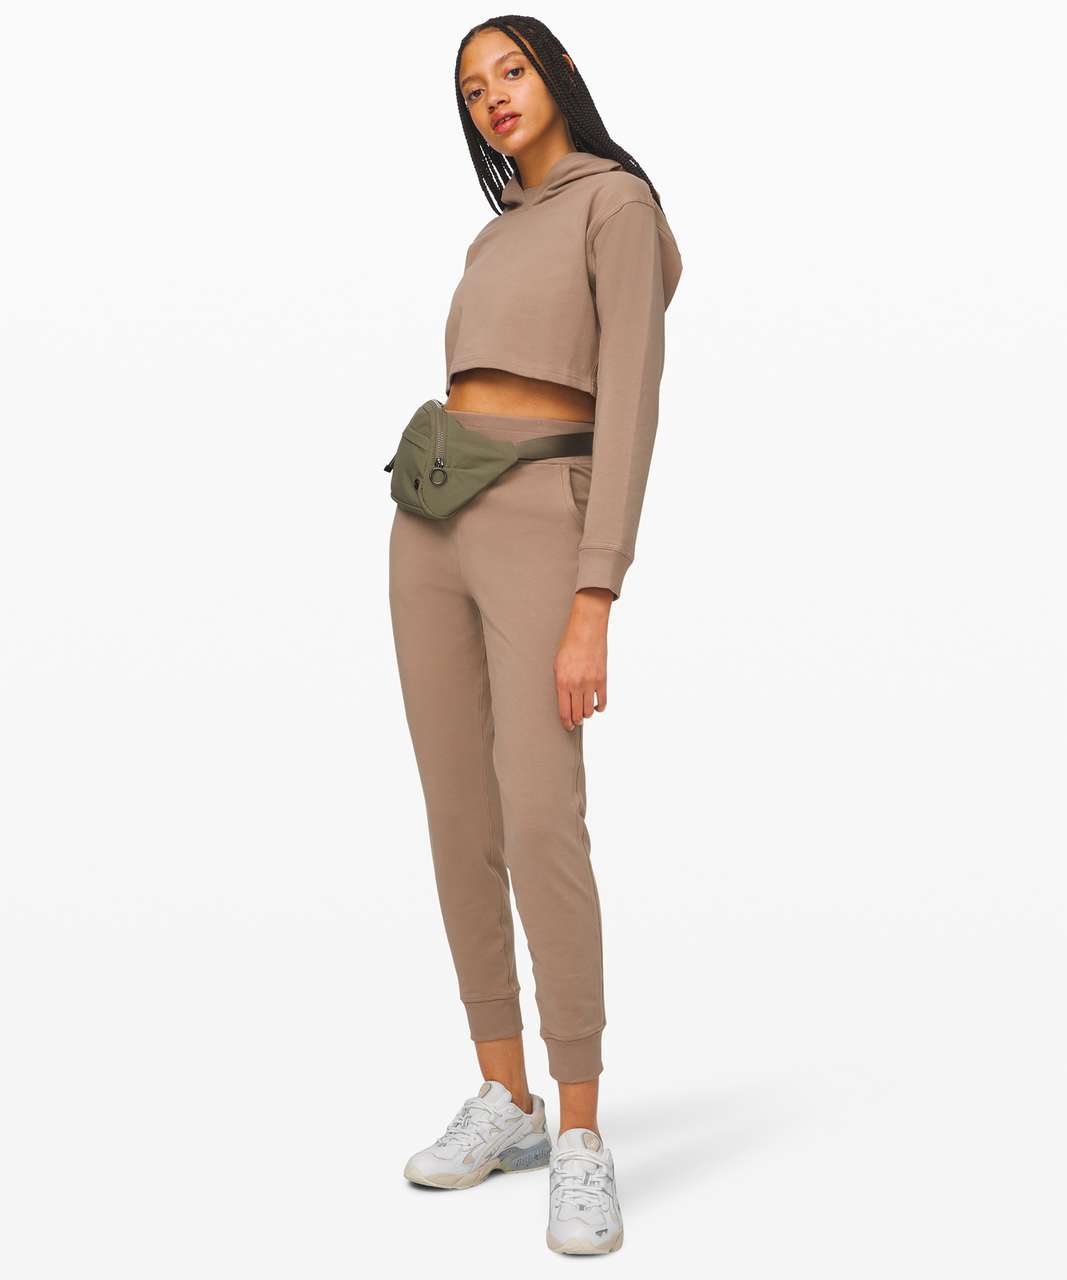 Lululemon All Yours Cropped Hoodie - Soft Sand